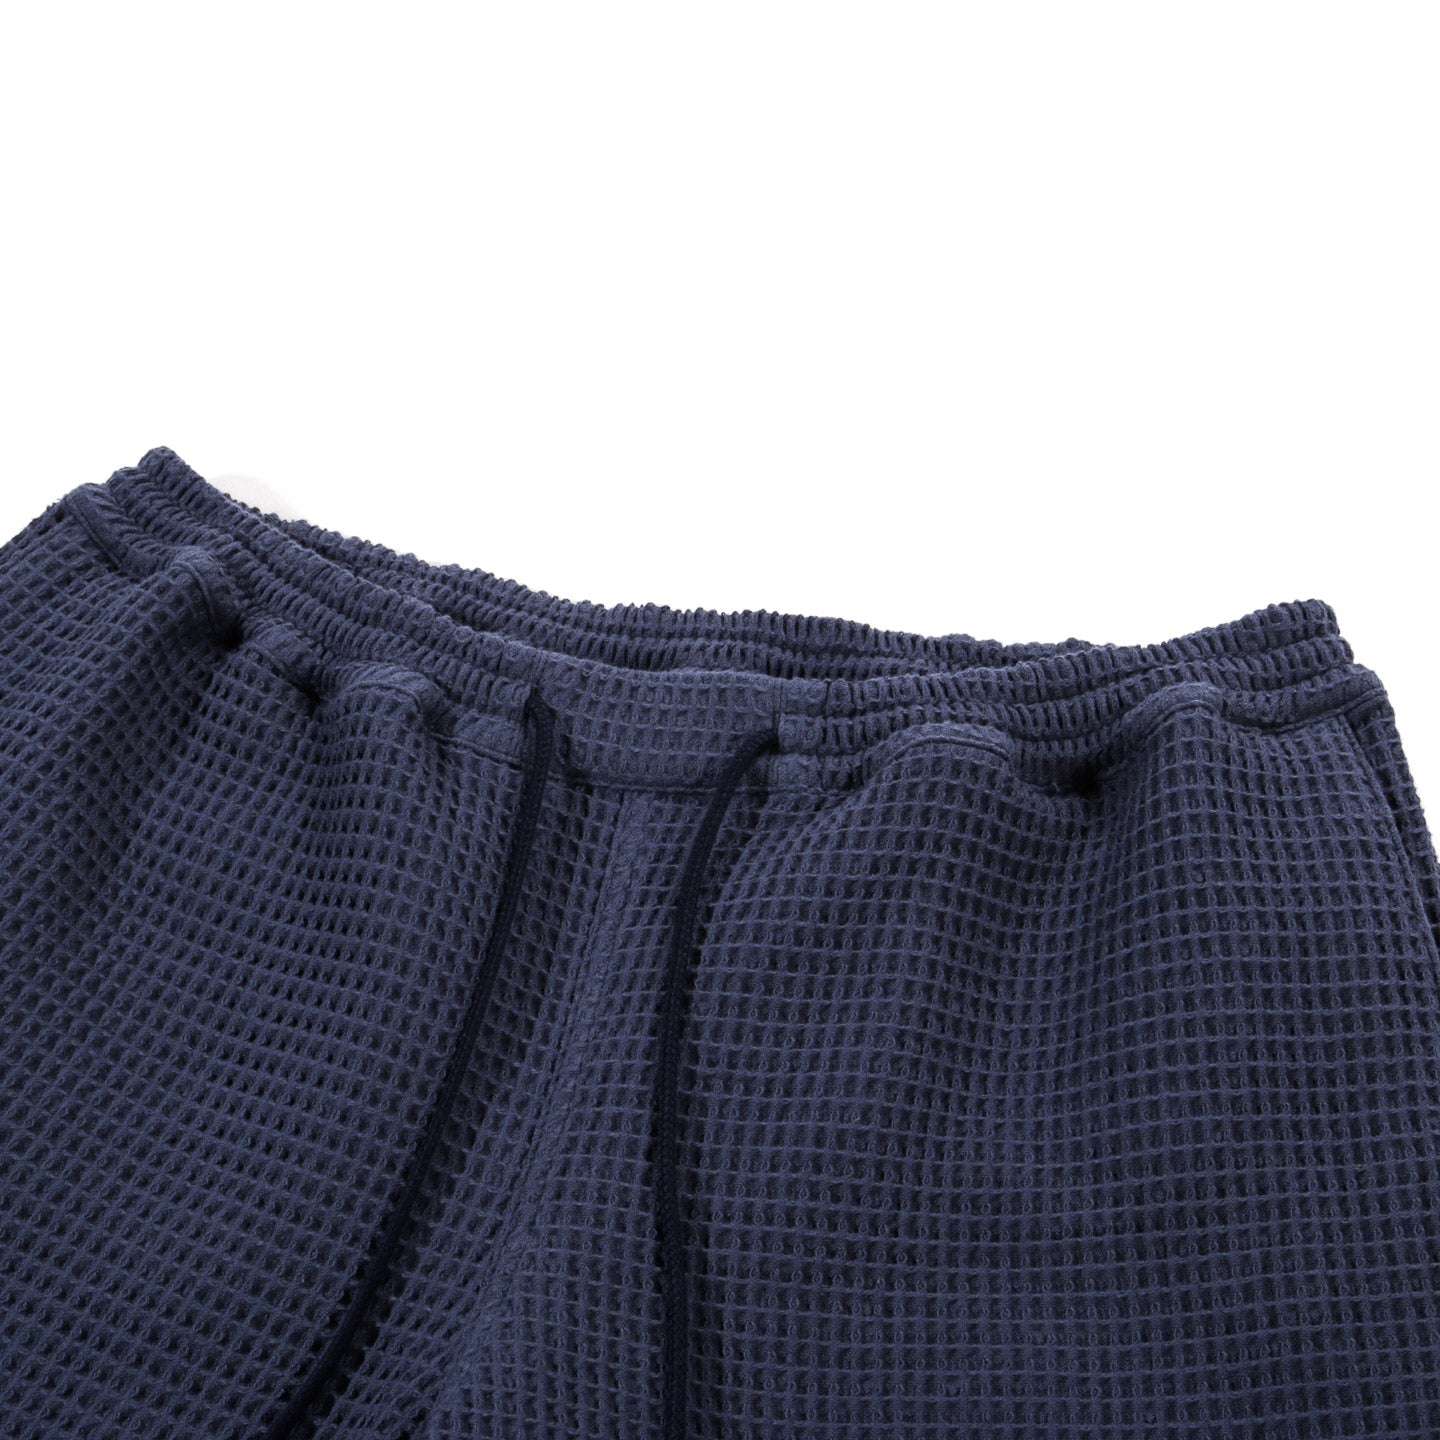 A KIND OF GUISE VOLTA SHORTS NIGHTSHADE NAVY